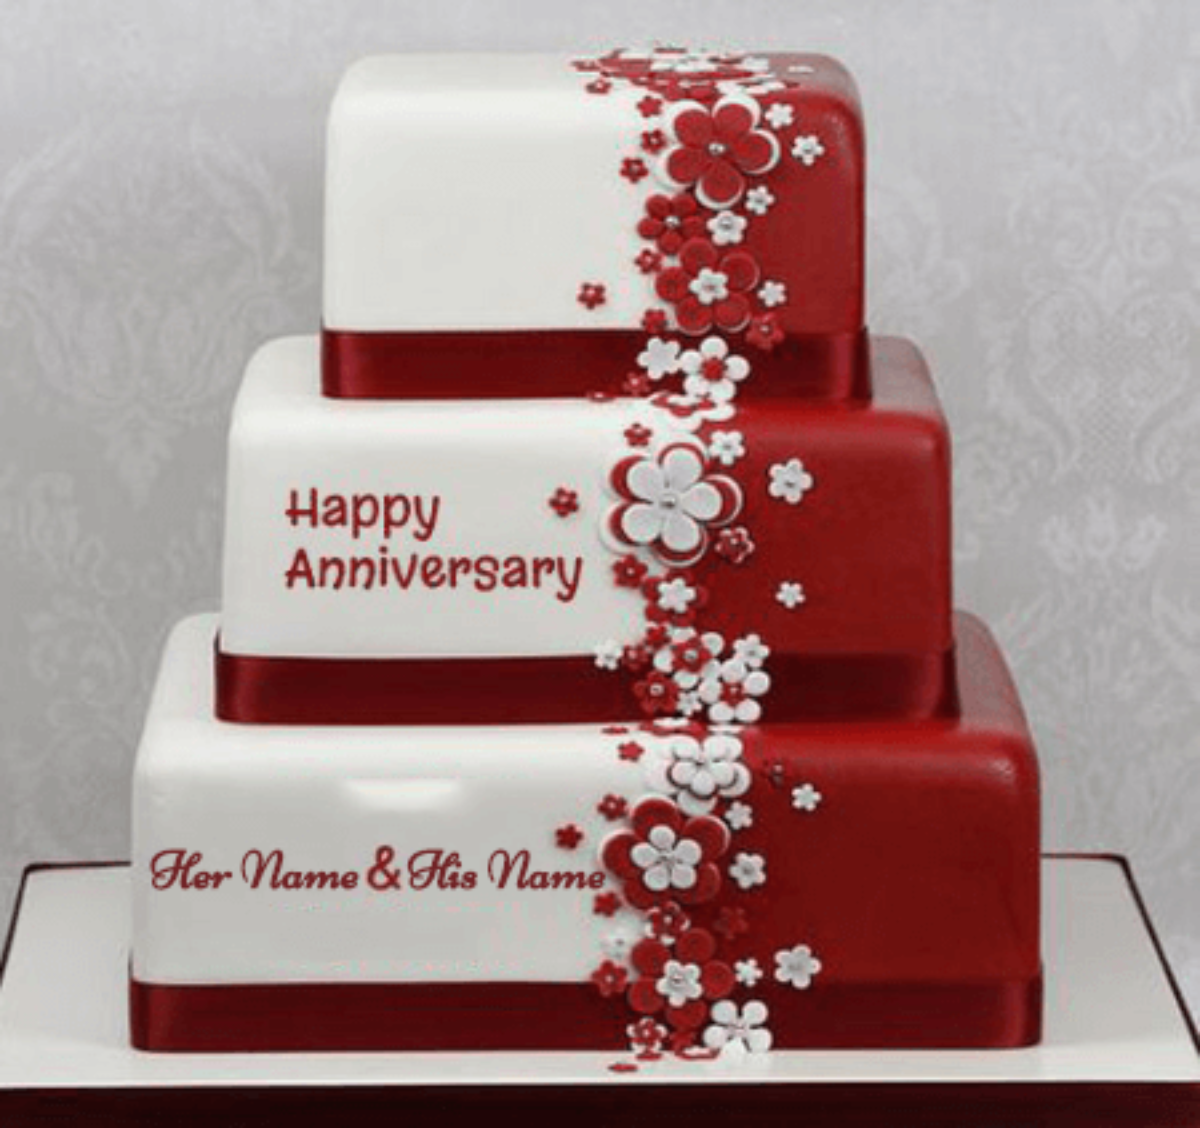 Luxury Cake for Anniversary - Unique Beautiful Cake with Name